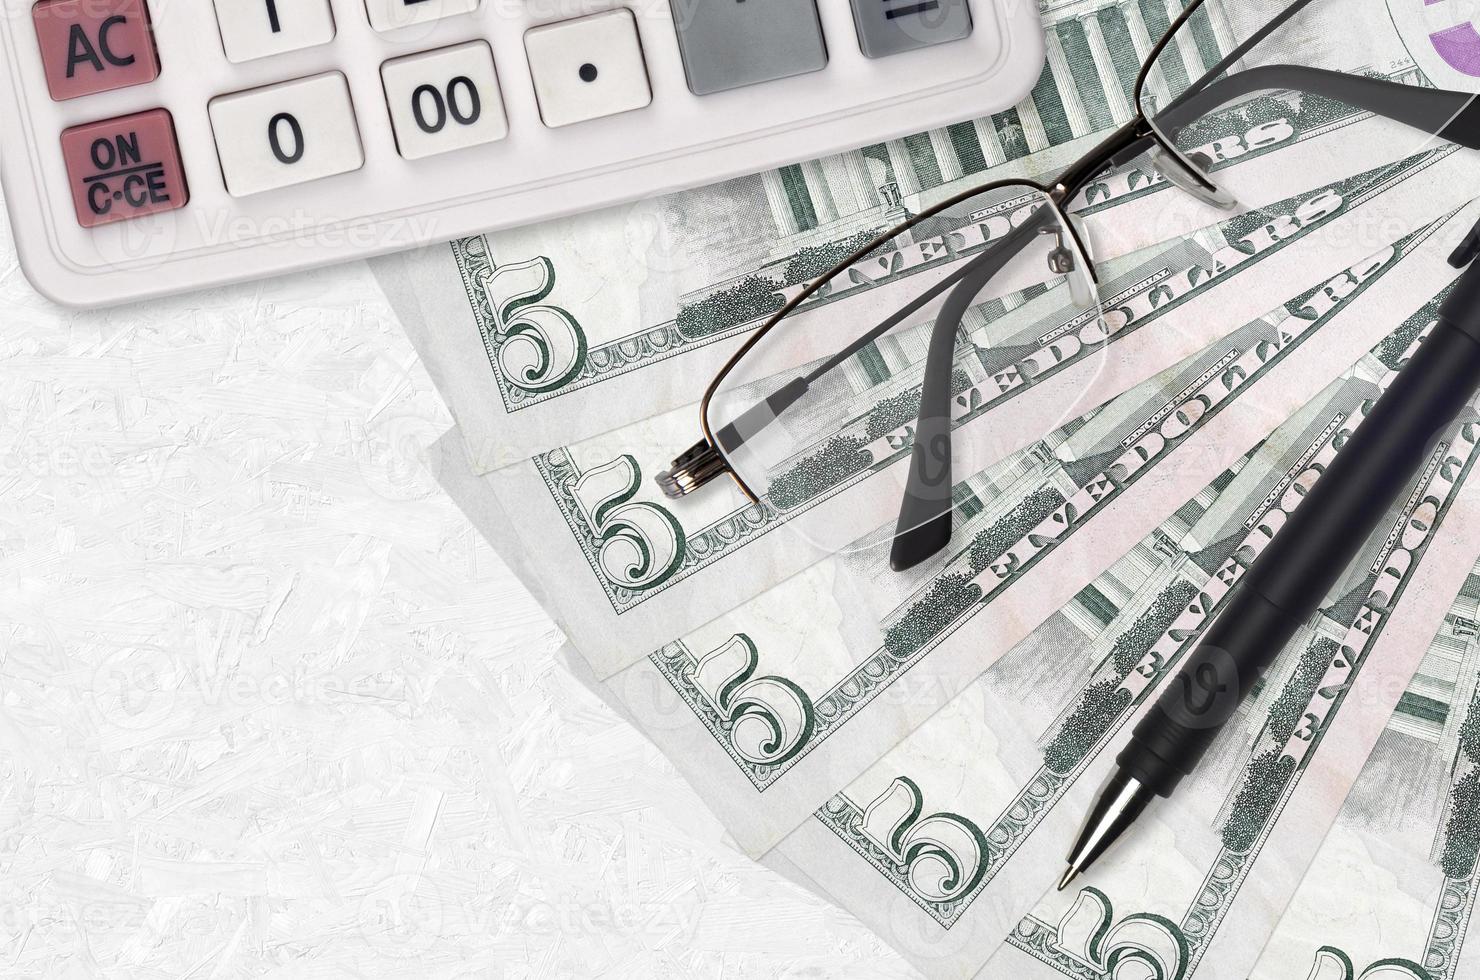 5 US dollars bills fan and calculator with glasses and pen. Business loan or tax payment season concept photo